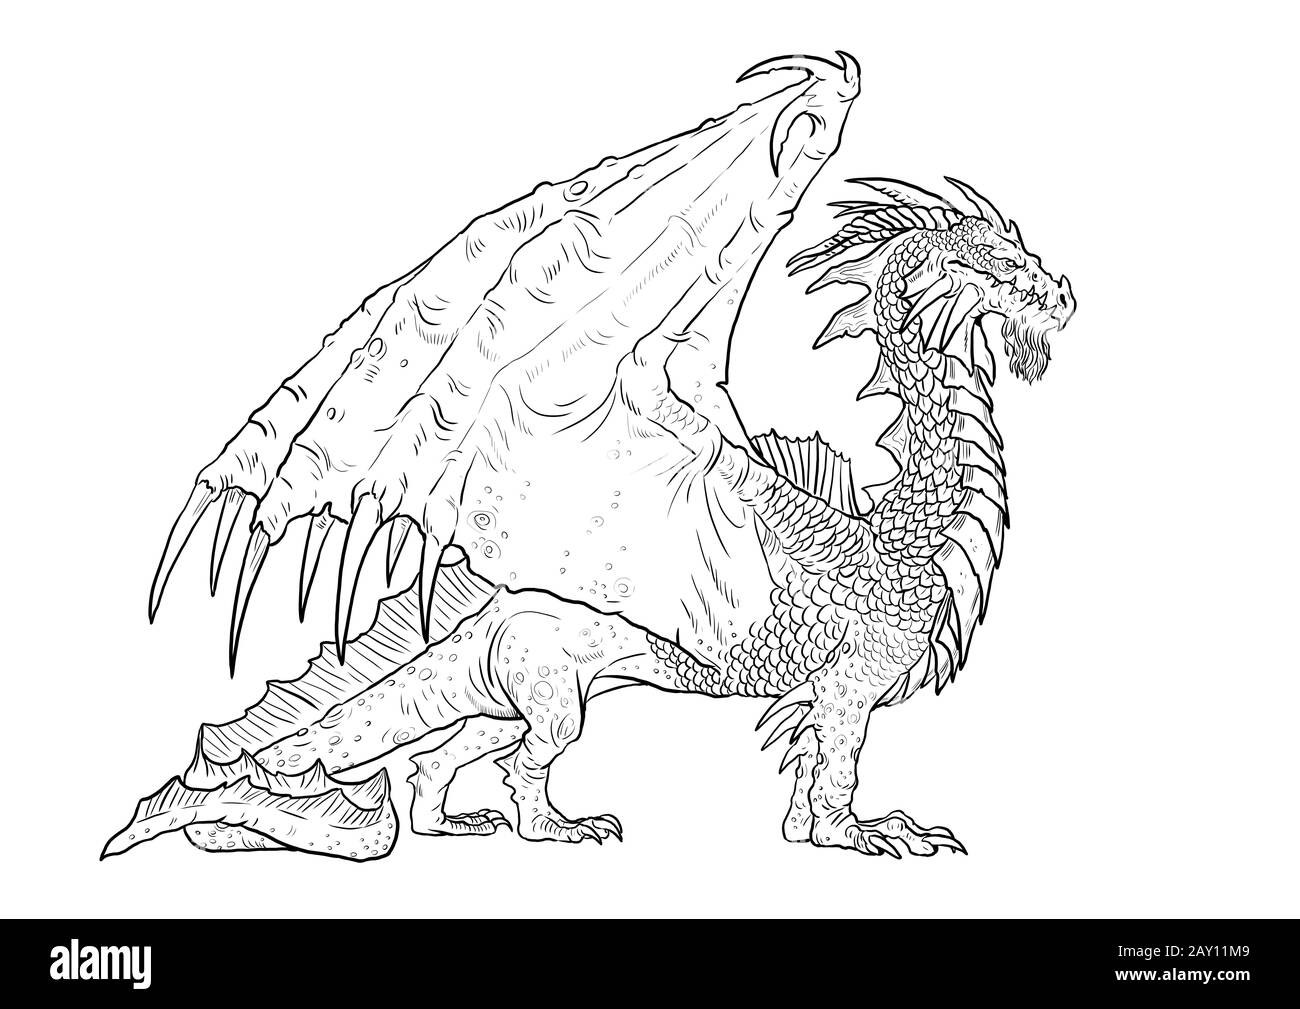 Dragon coloring page. Outline illustration. Dragon drawing coloring sheet. Stock Photo